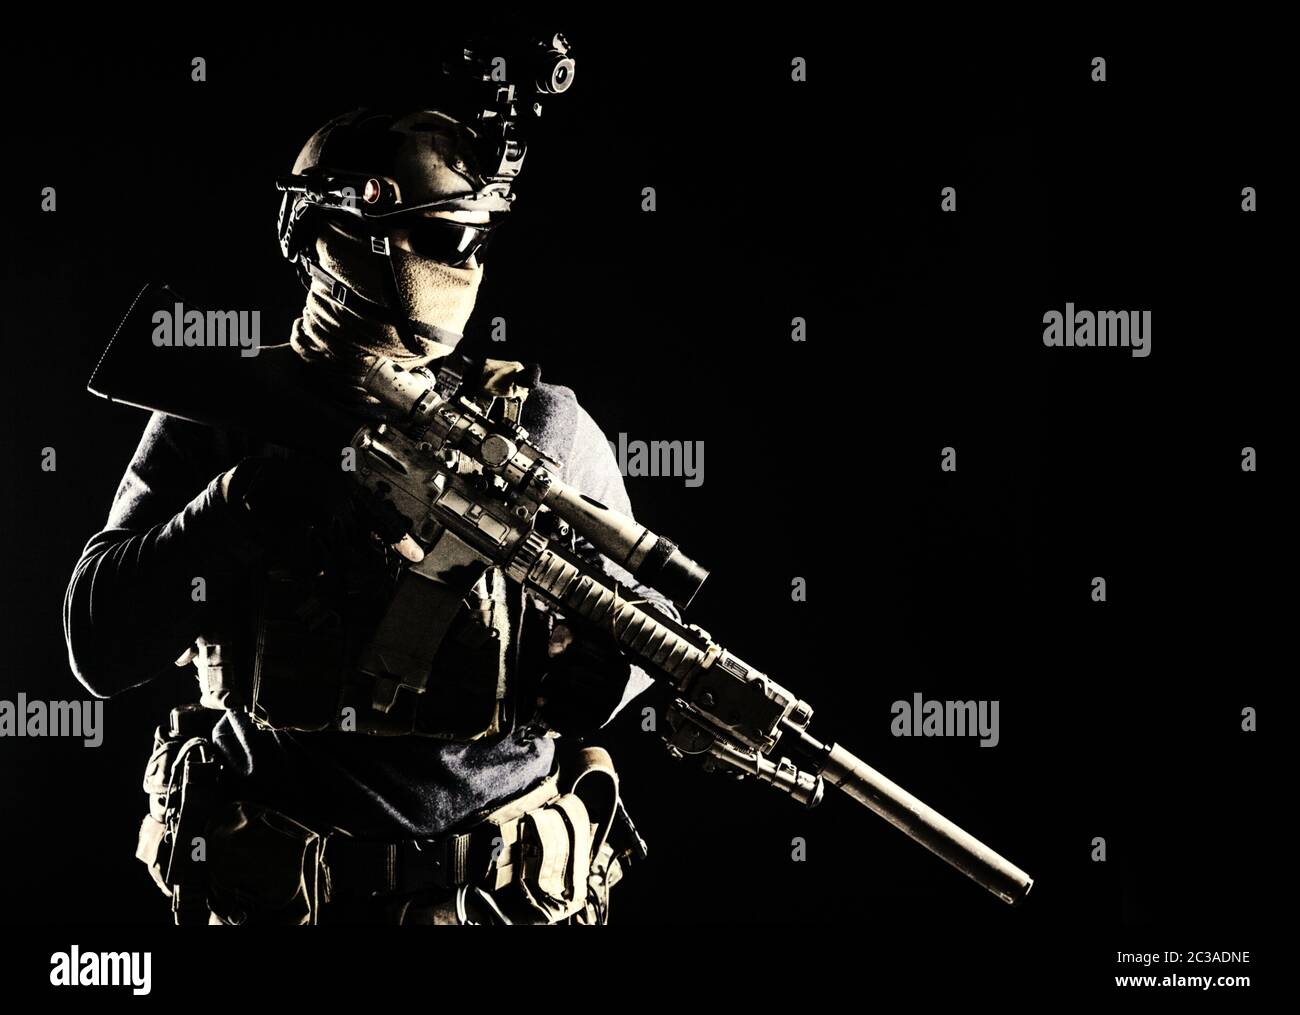 Army elite troops marksman, special operations forces sniper wearing mask and glasses, night-vision or infrared thermal imaging device on helmet, hold Stock Photo